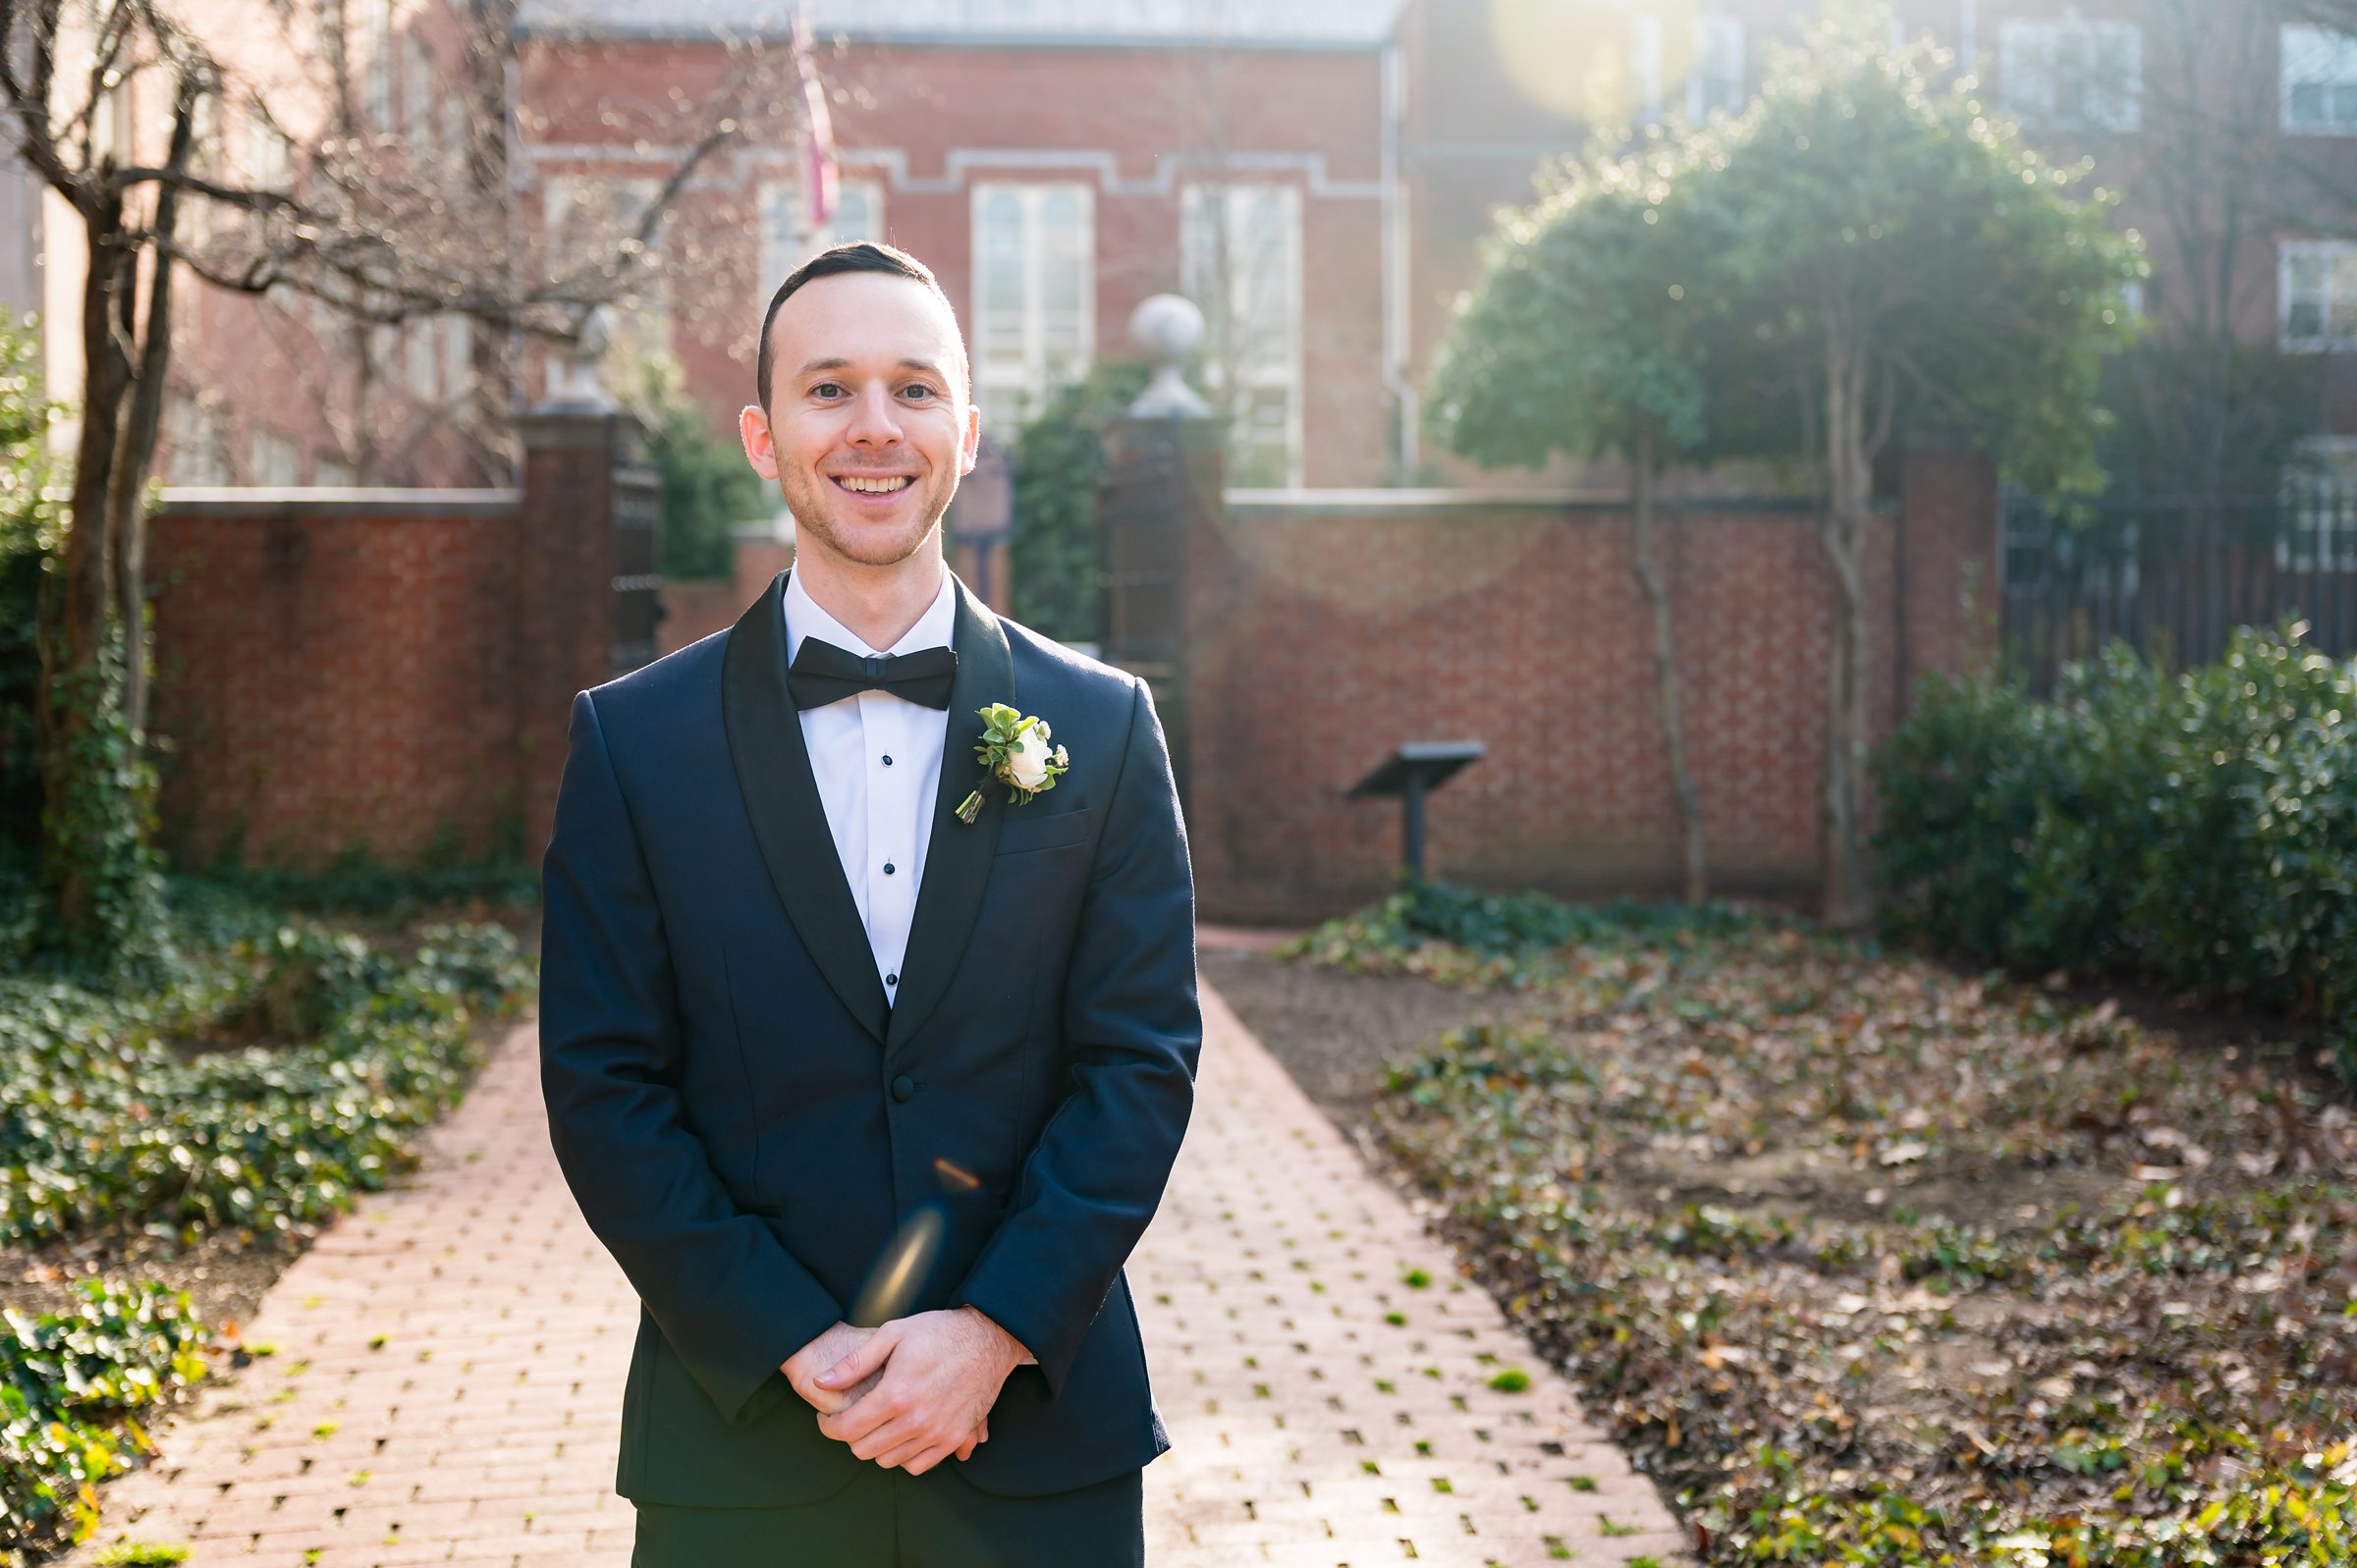 At the Lilah Events wedding, a groom in a tuxedo stands in front of a brick walkway.